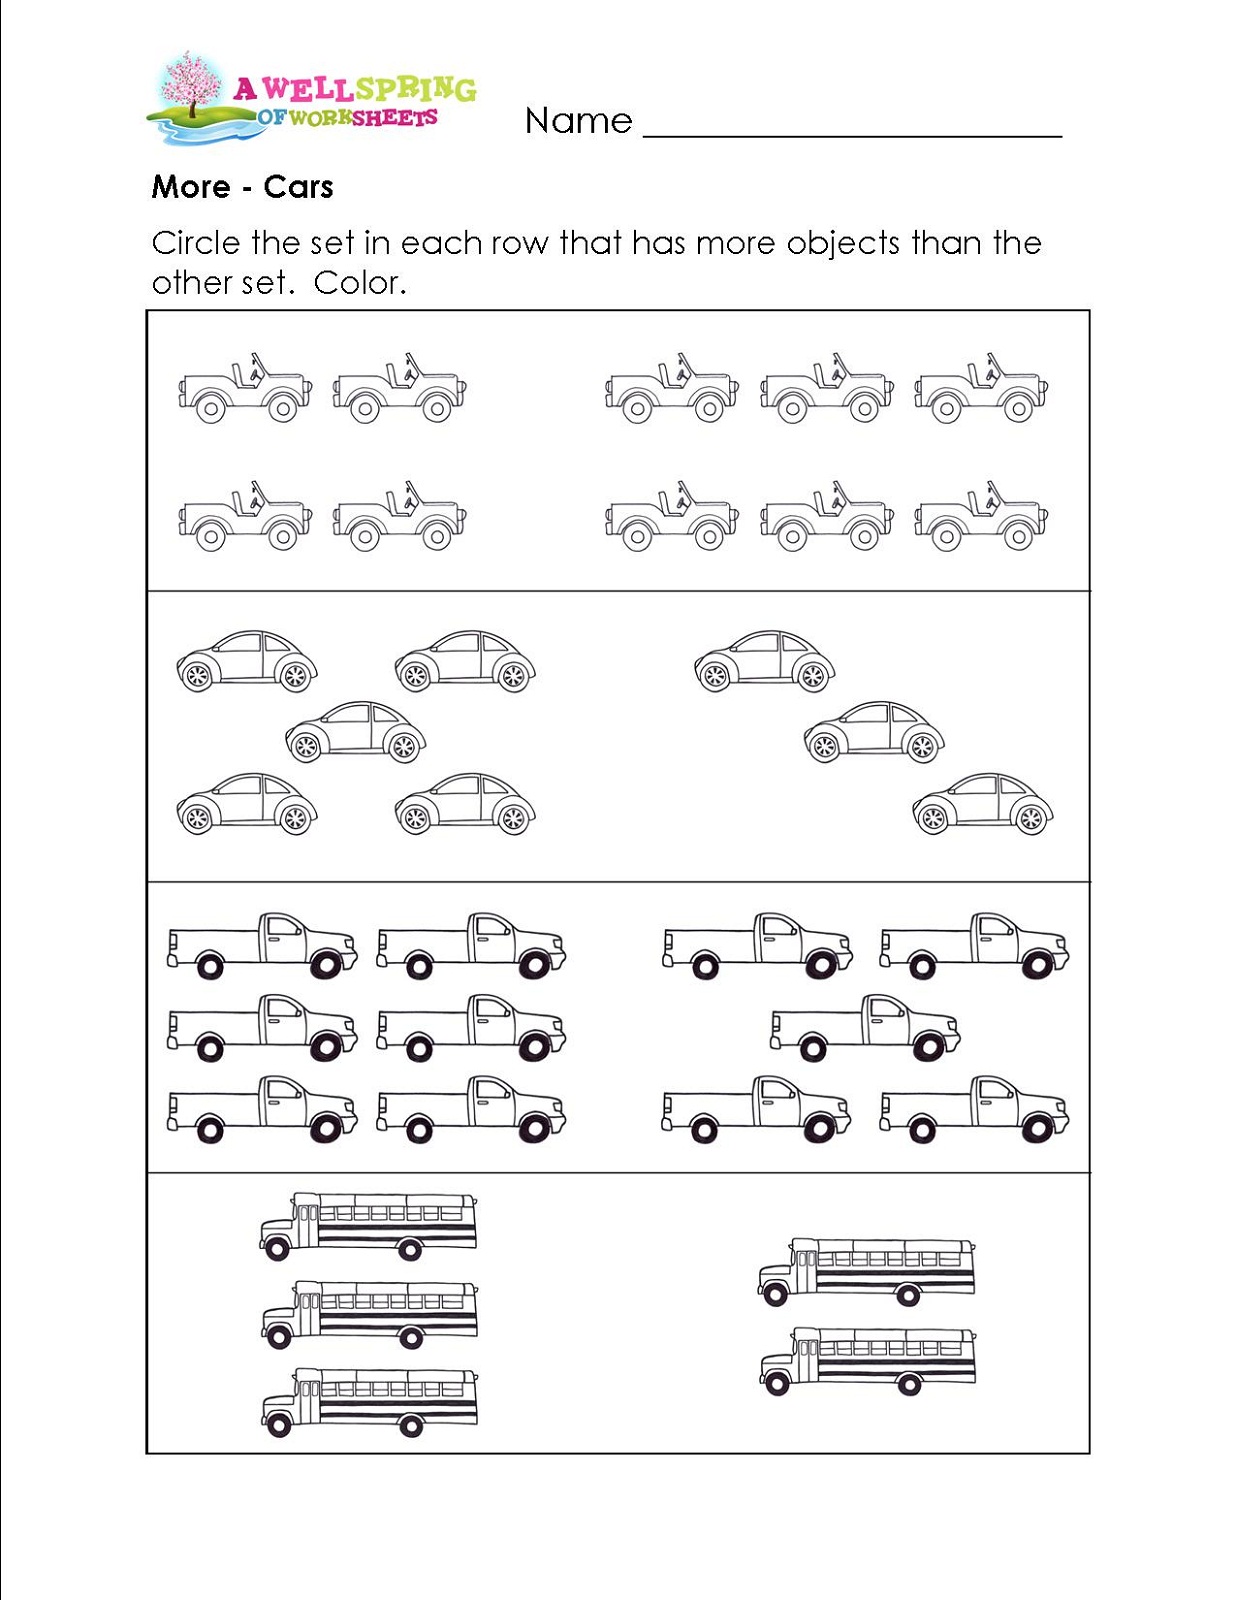 more or less worksheets for kids